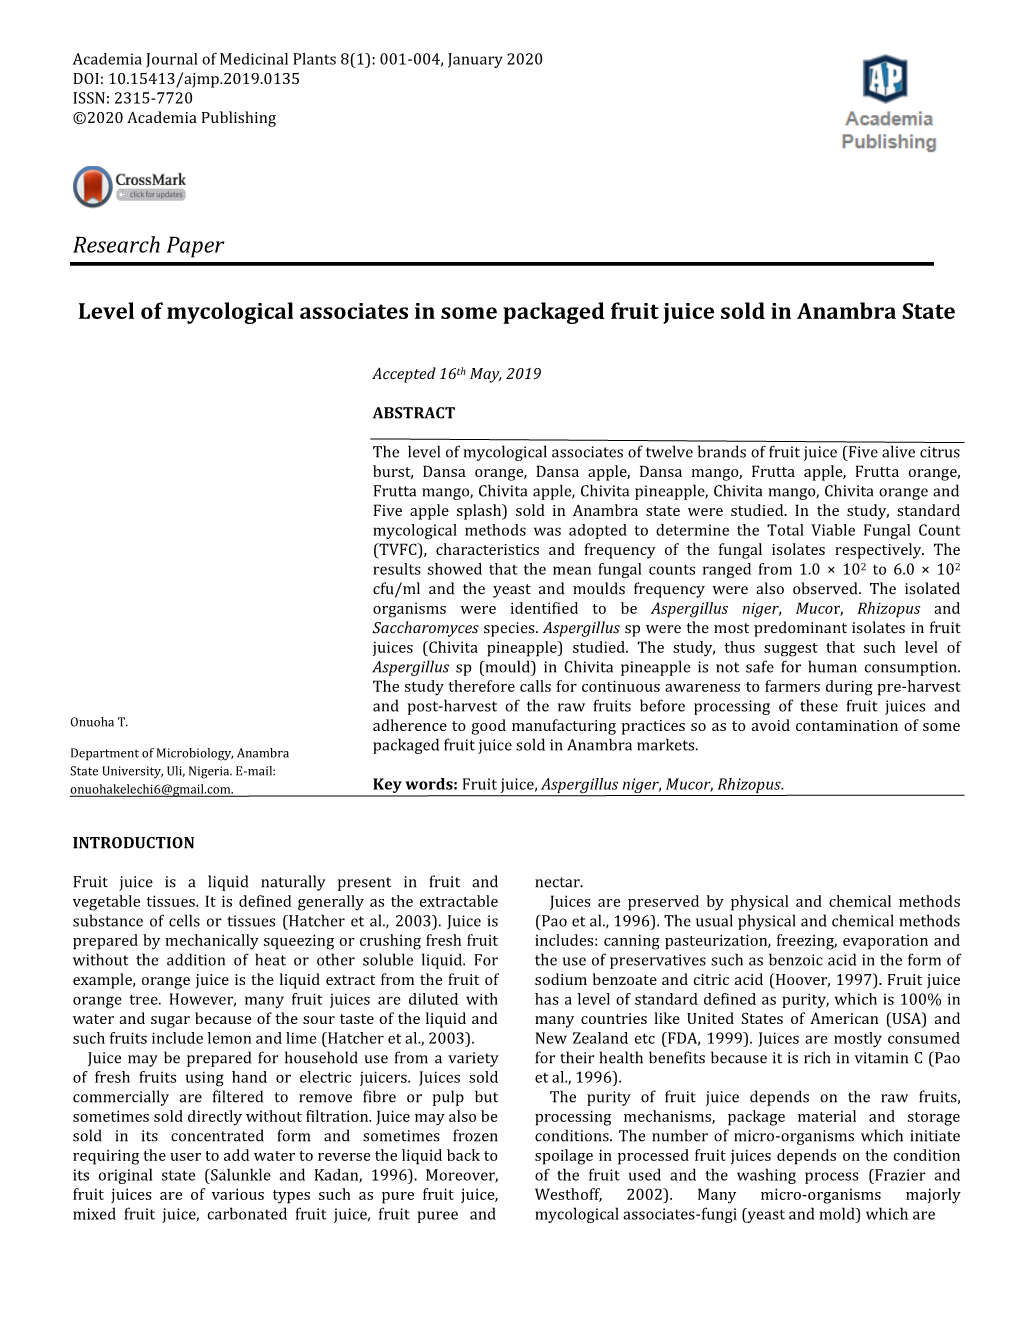 Research Paper Level of Mycological Associates in Some Packaged Fruit